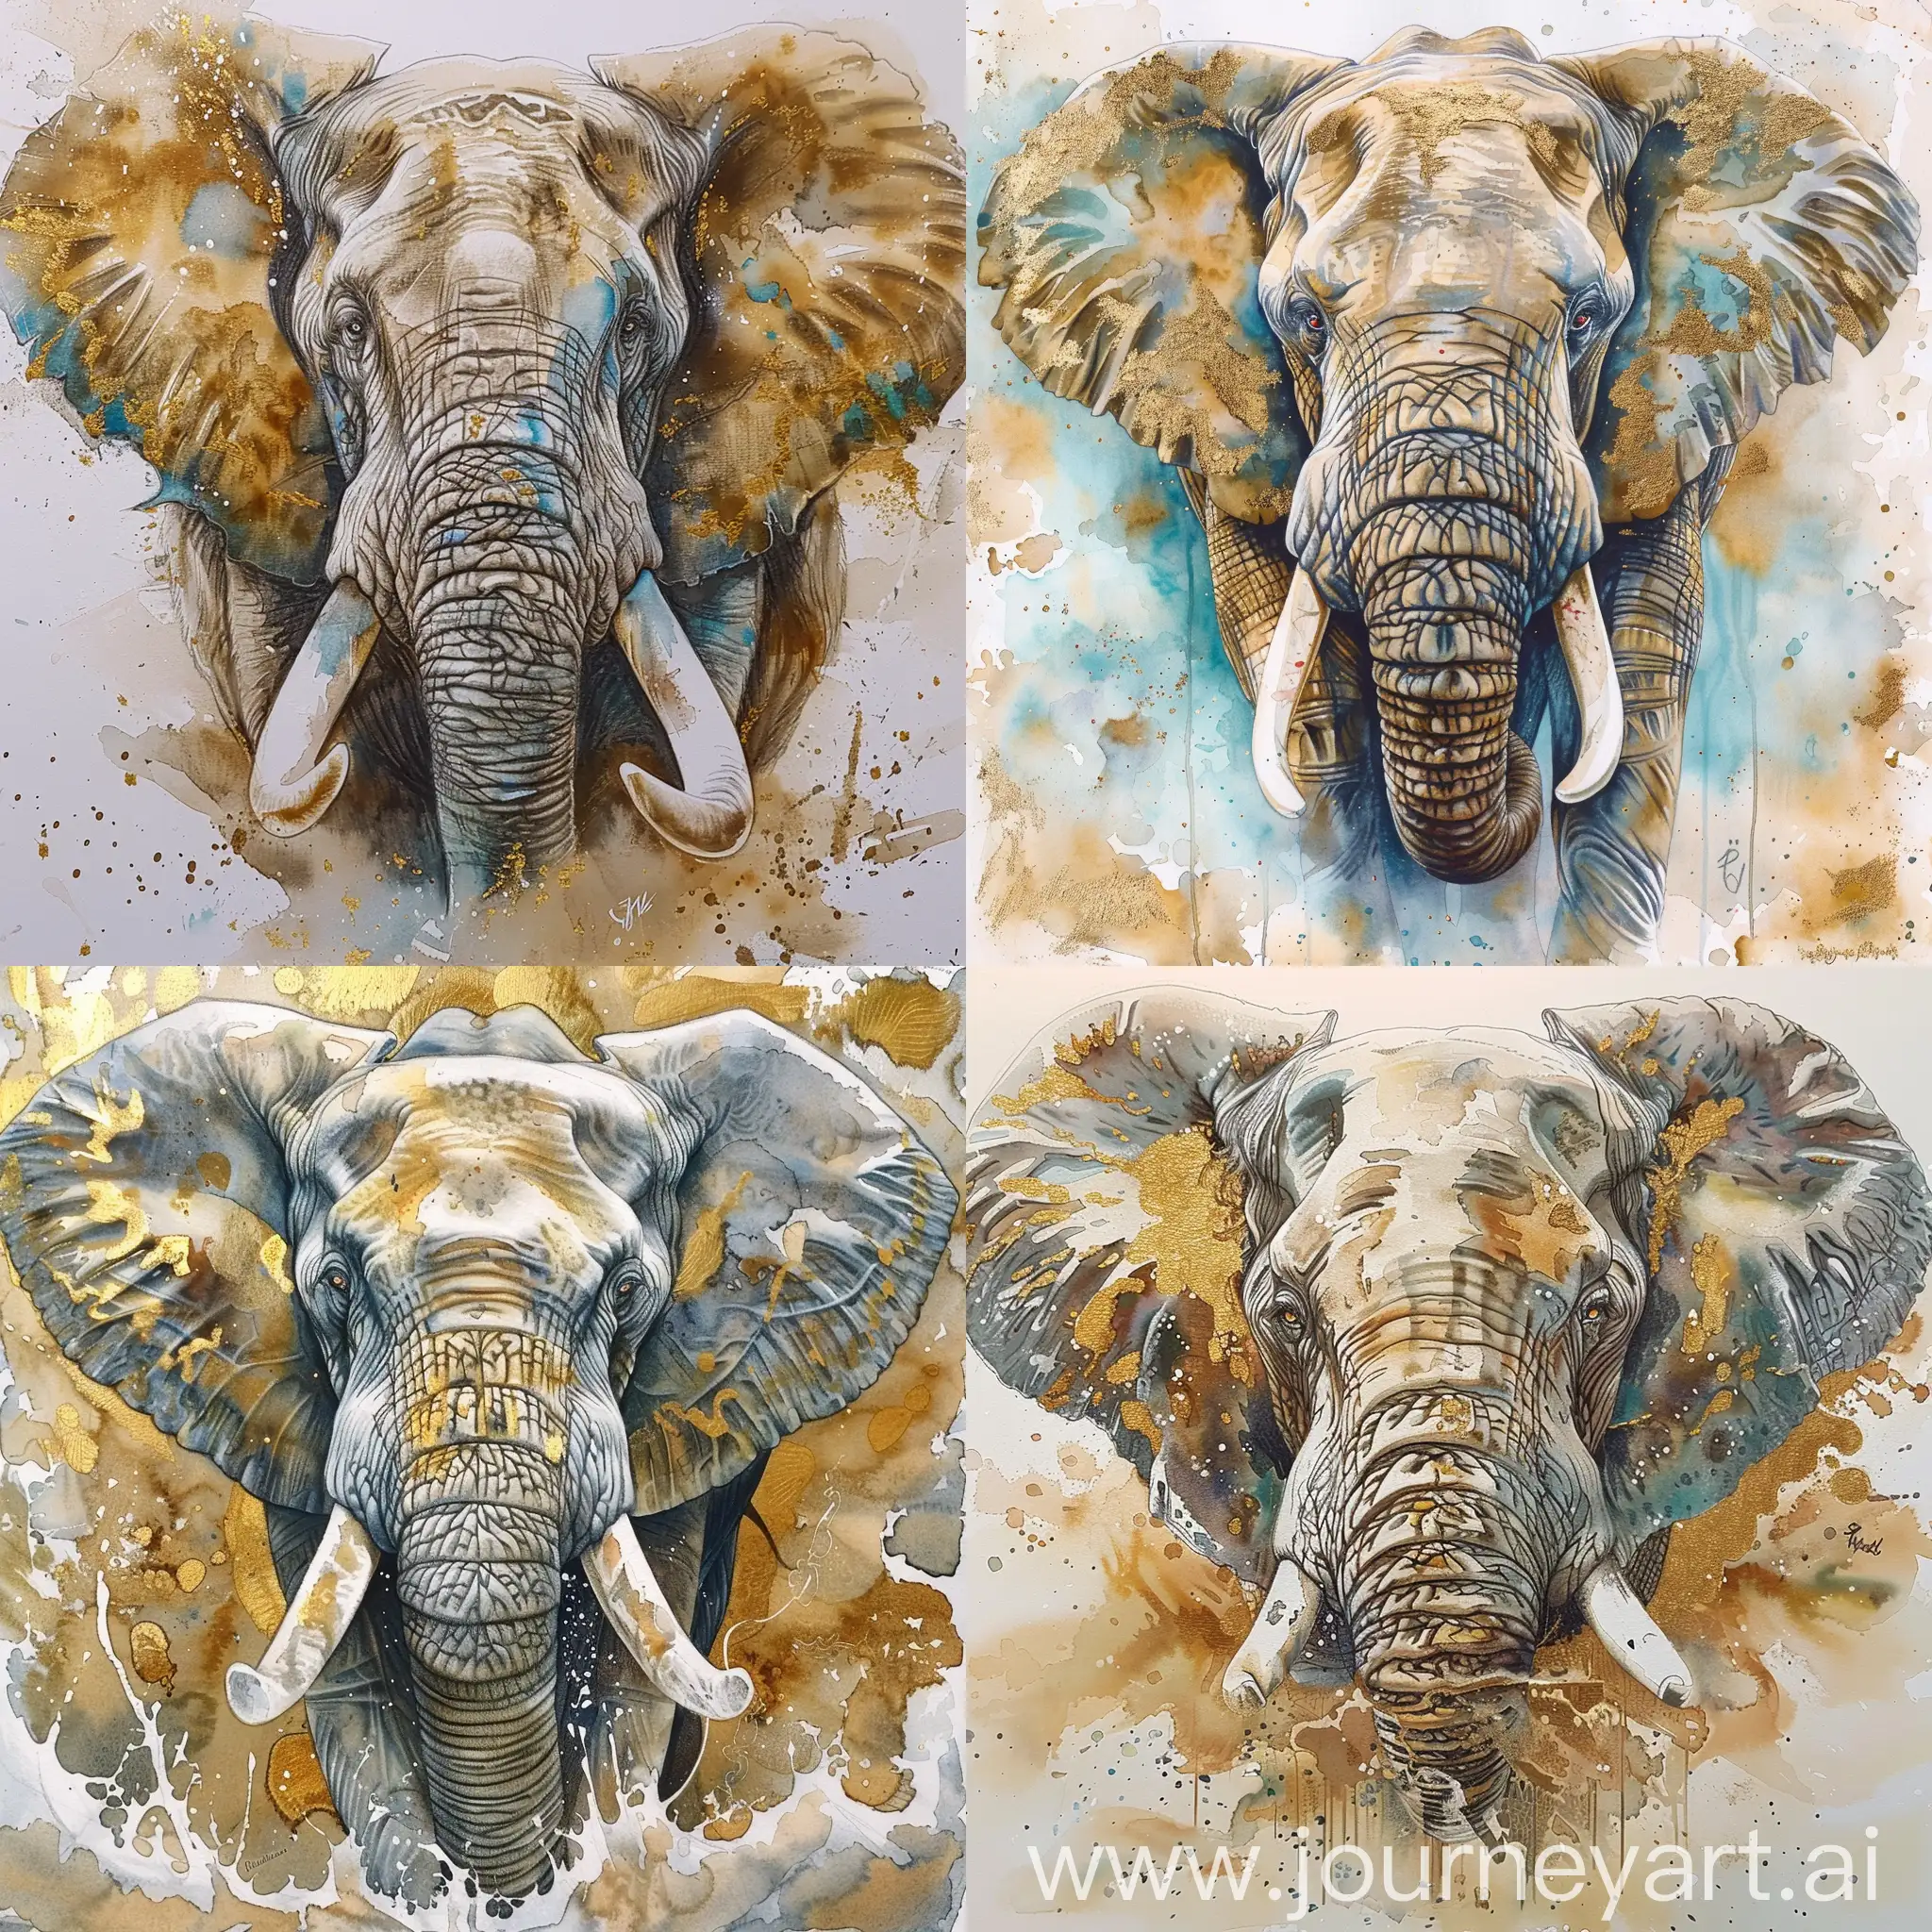 Wise-Elephant-Portrait-in-Gold-and-Turquoise-Watercolors